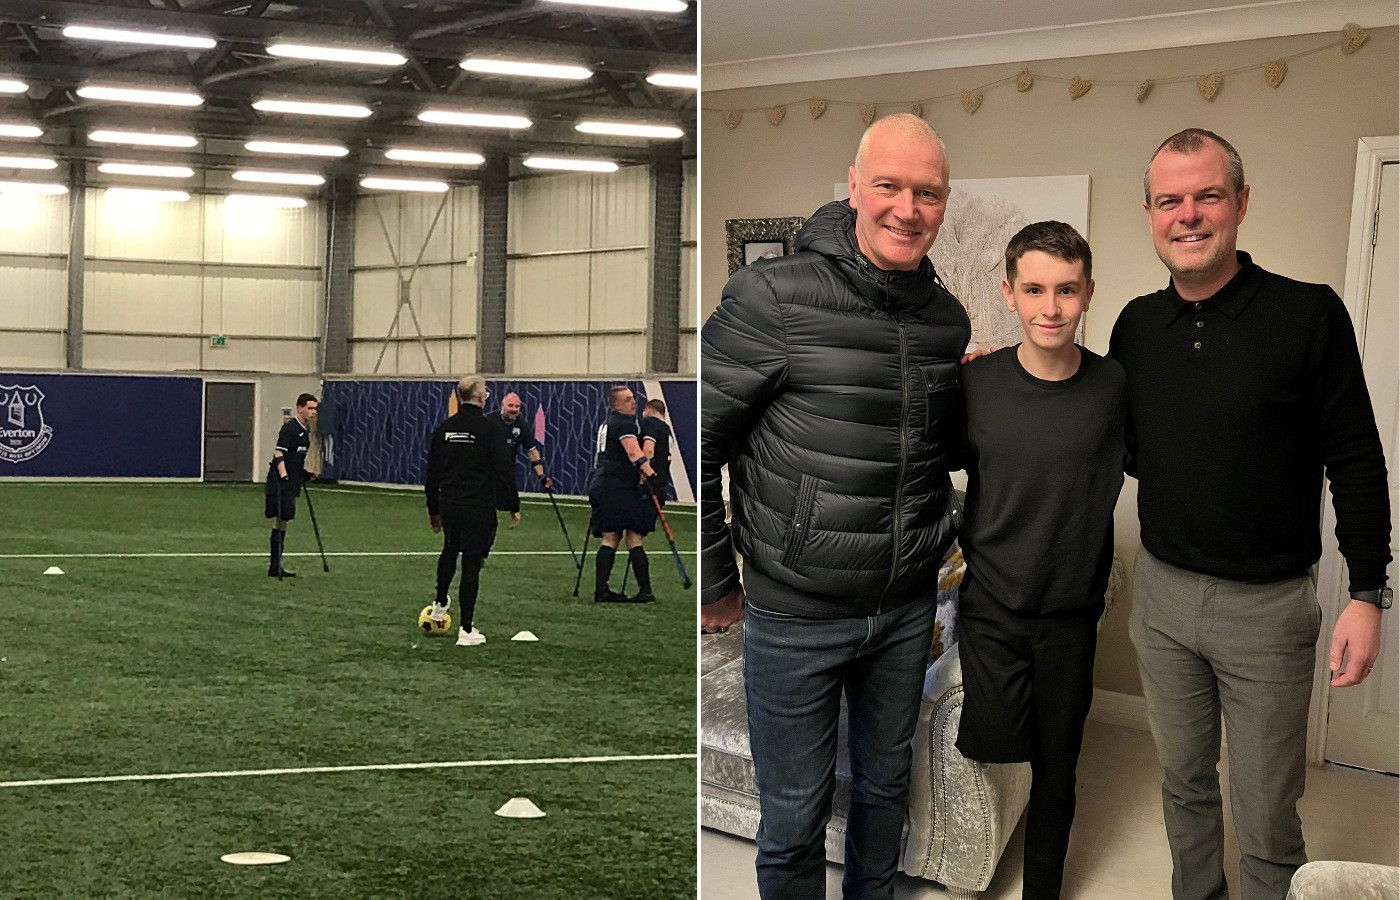 The teen has since trained with Everton and met the Ayr United manager and director. 